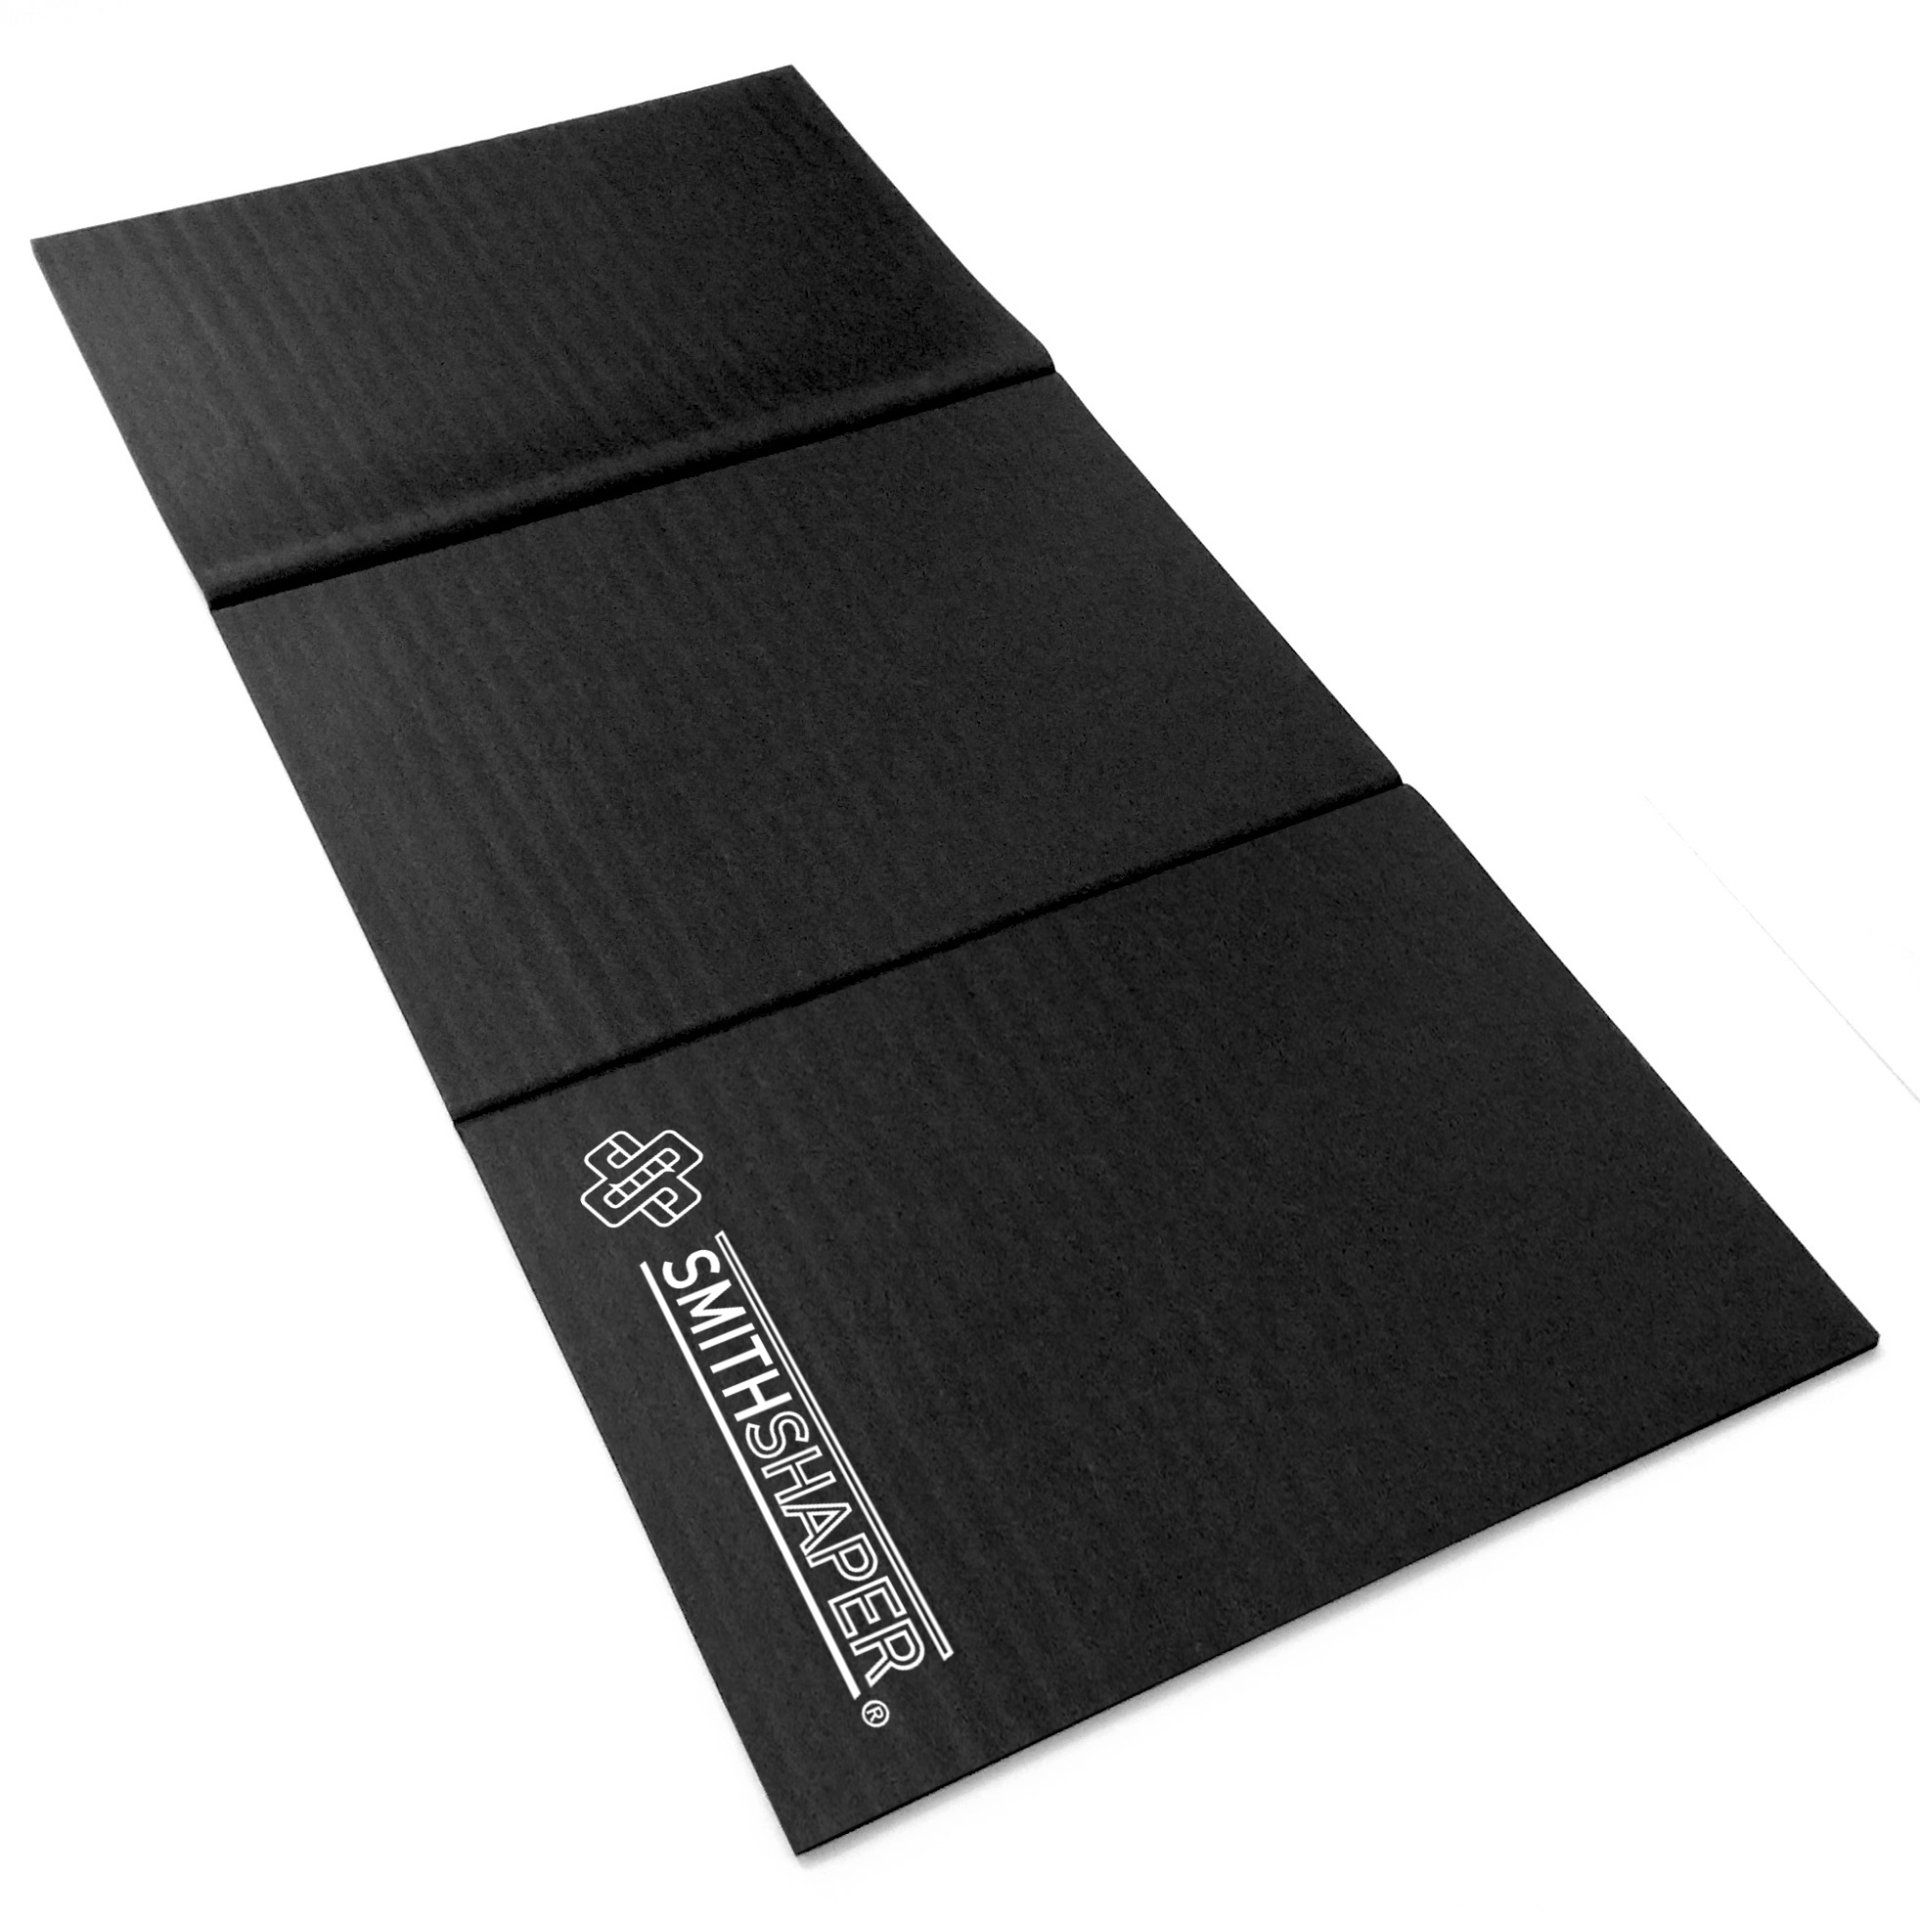 shows the underside of the Smithshaper Squat Mat Exercise Pad and Leg Muscle Targeting Tool